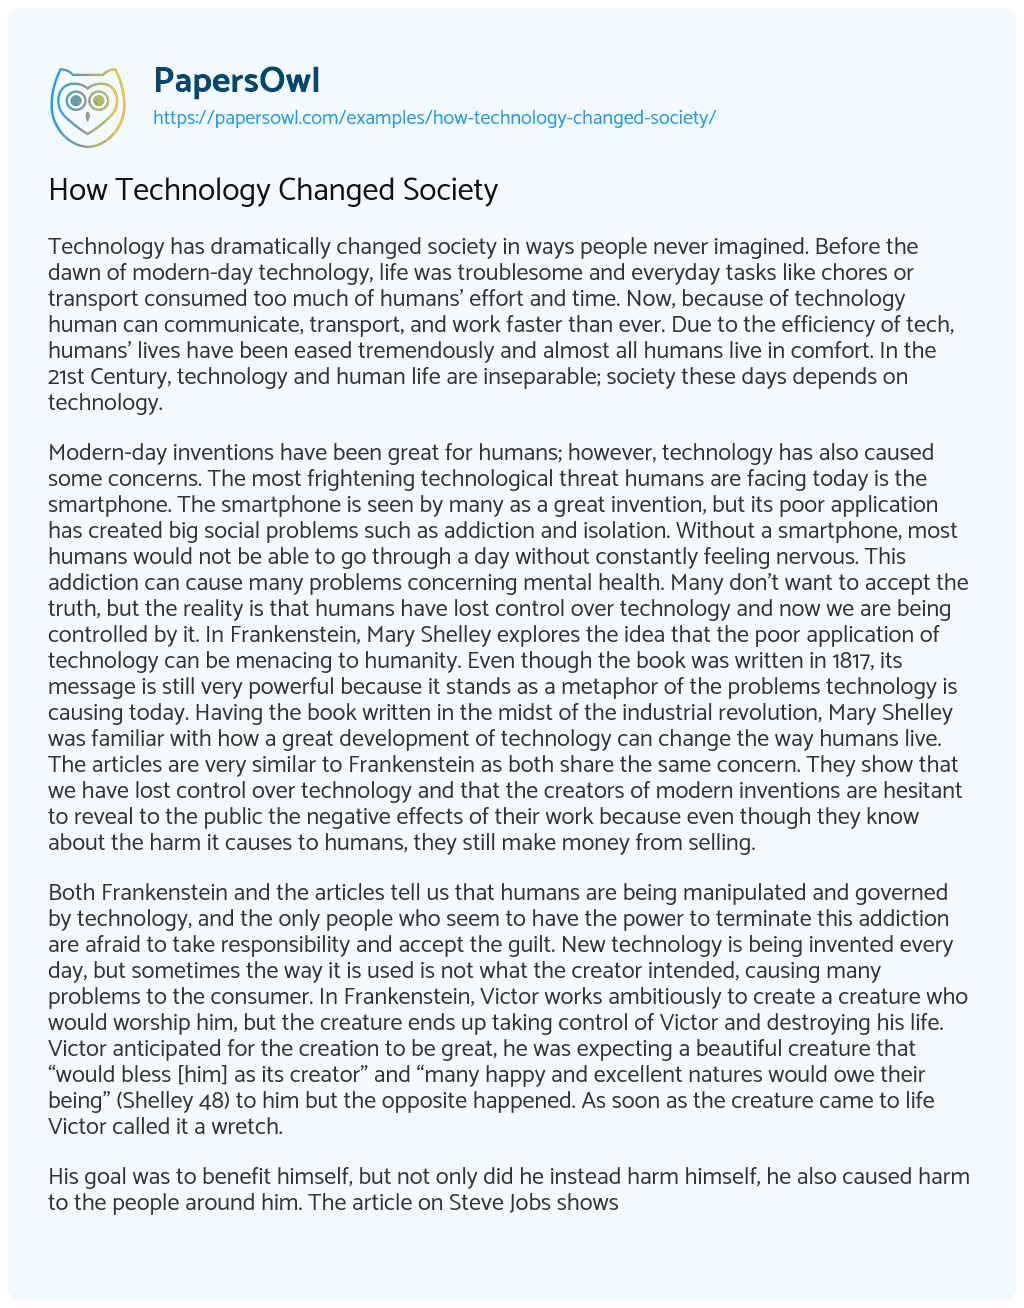 Essay on How Technology Changed Society